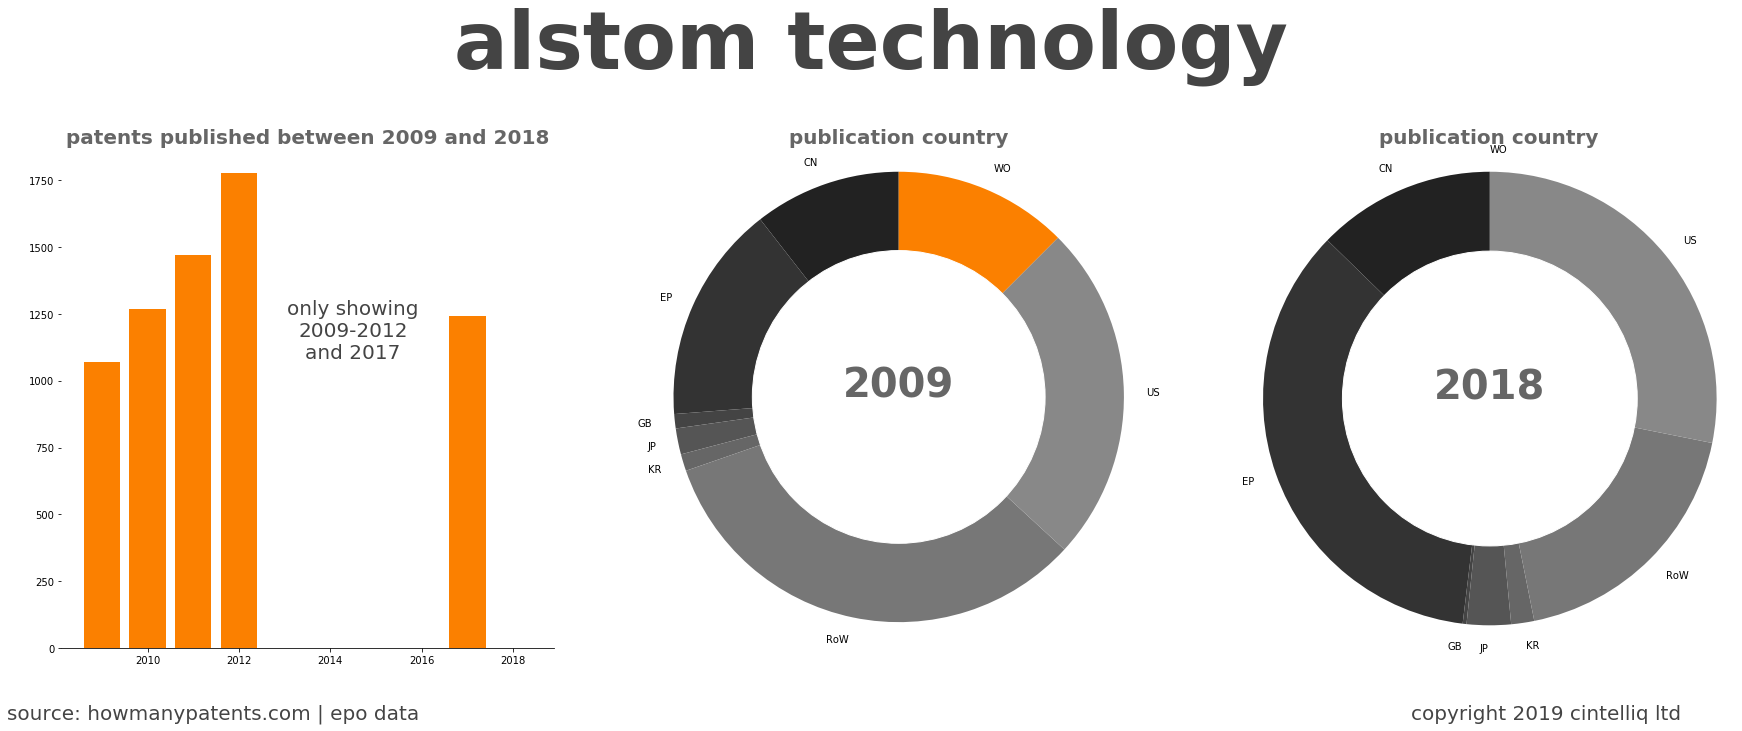 summary of patents for Alstom Technology